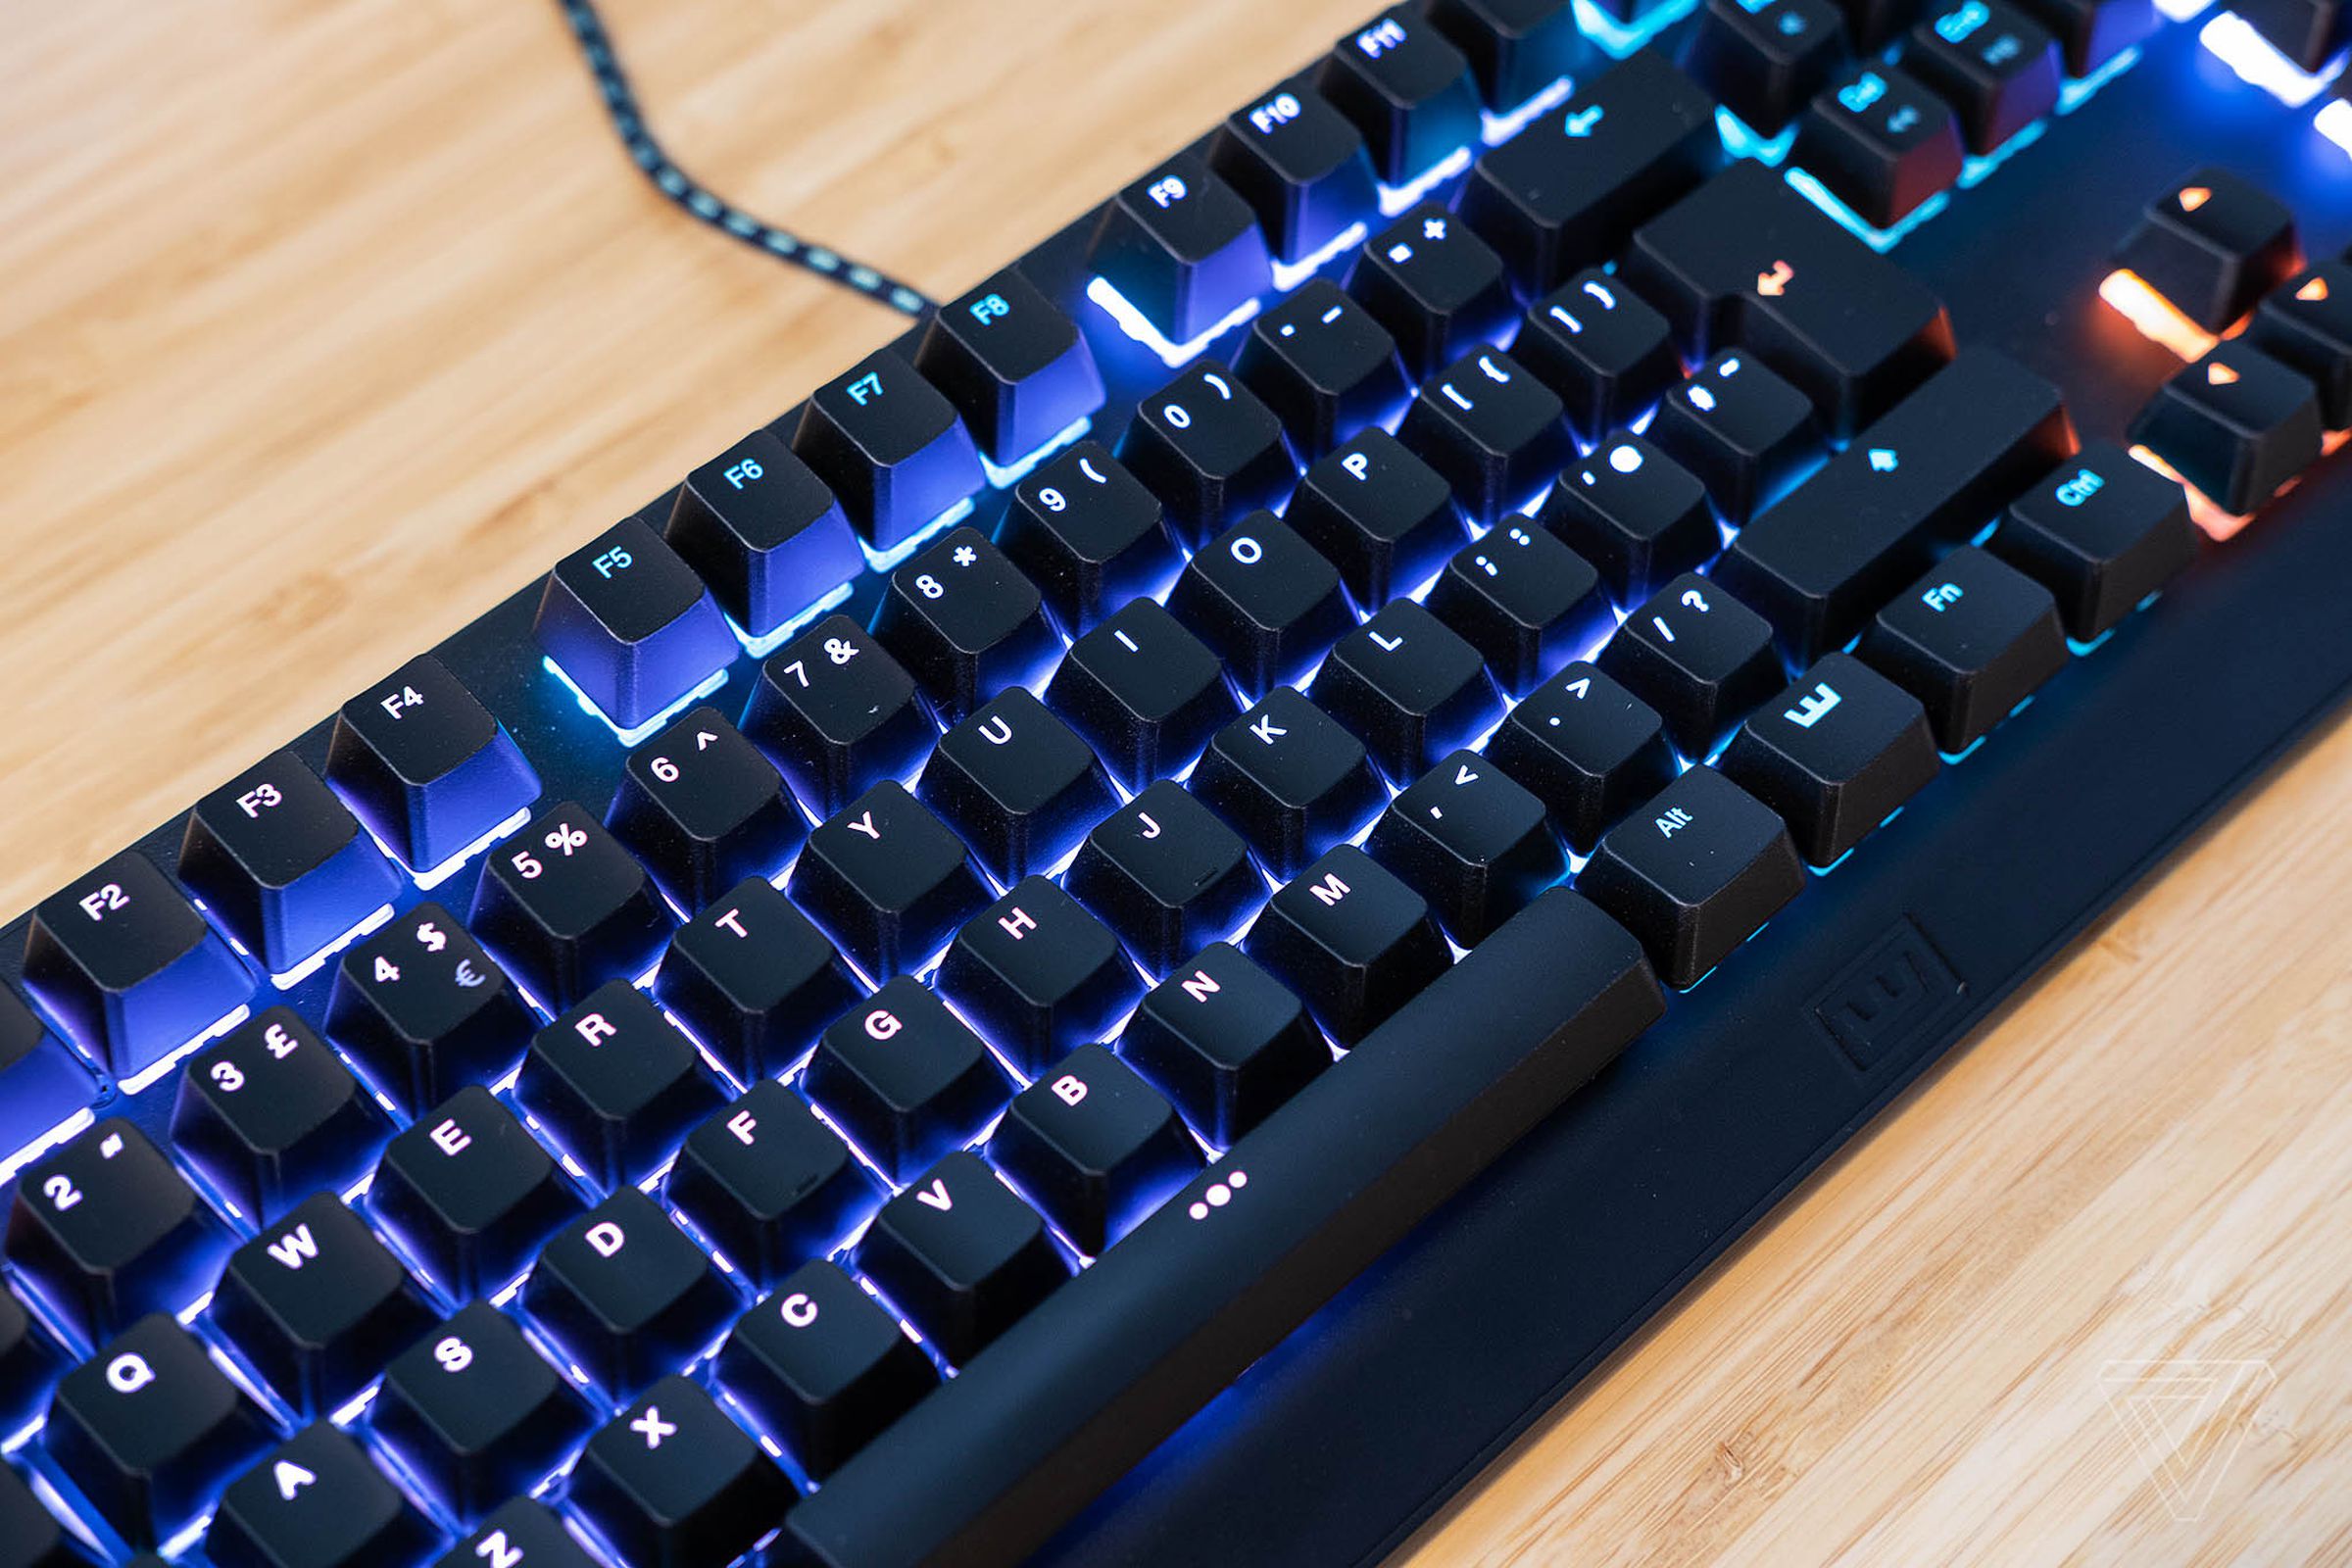 The per-key RGB backlighting in action.